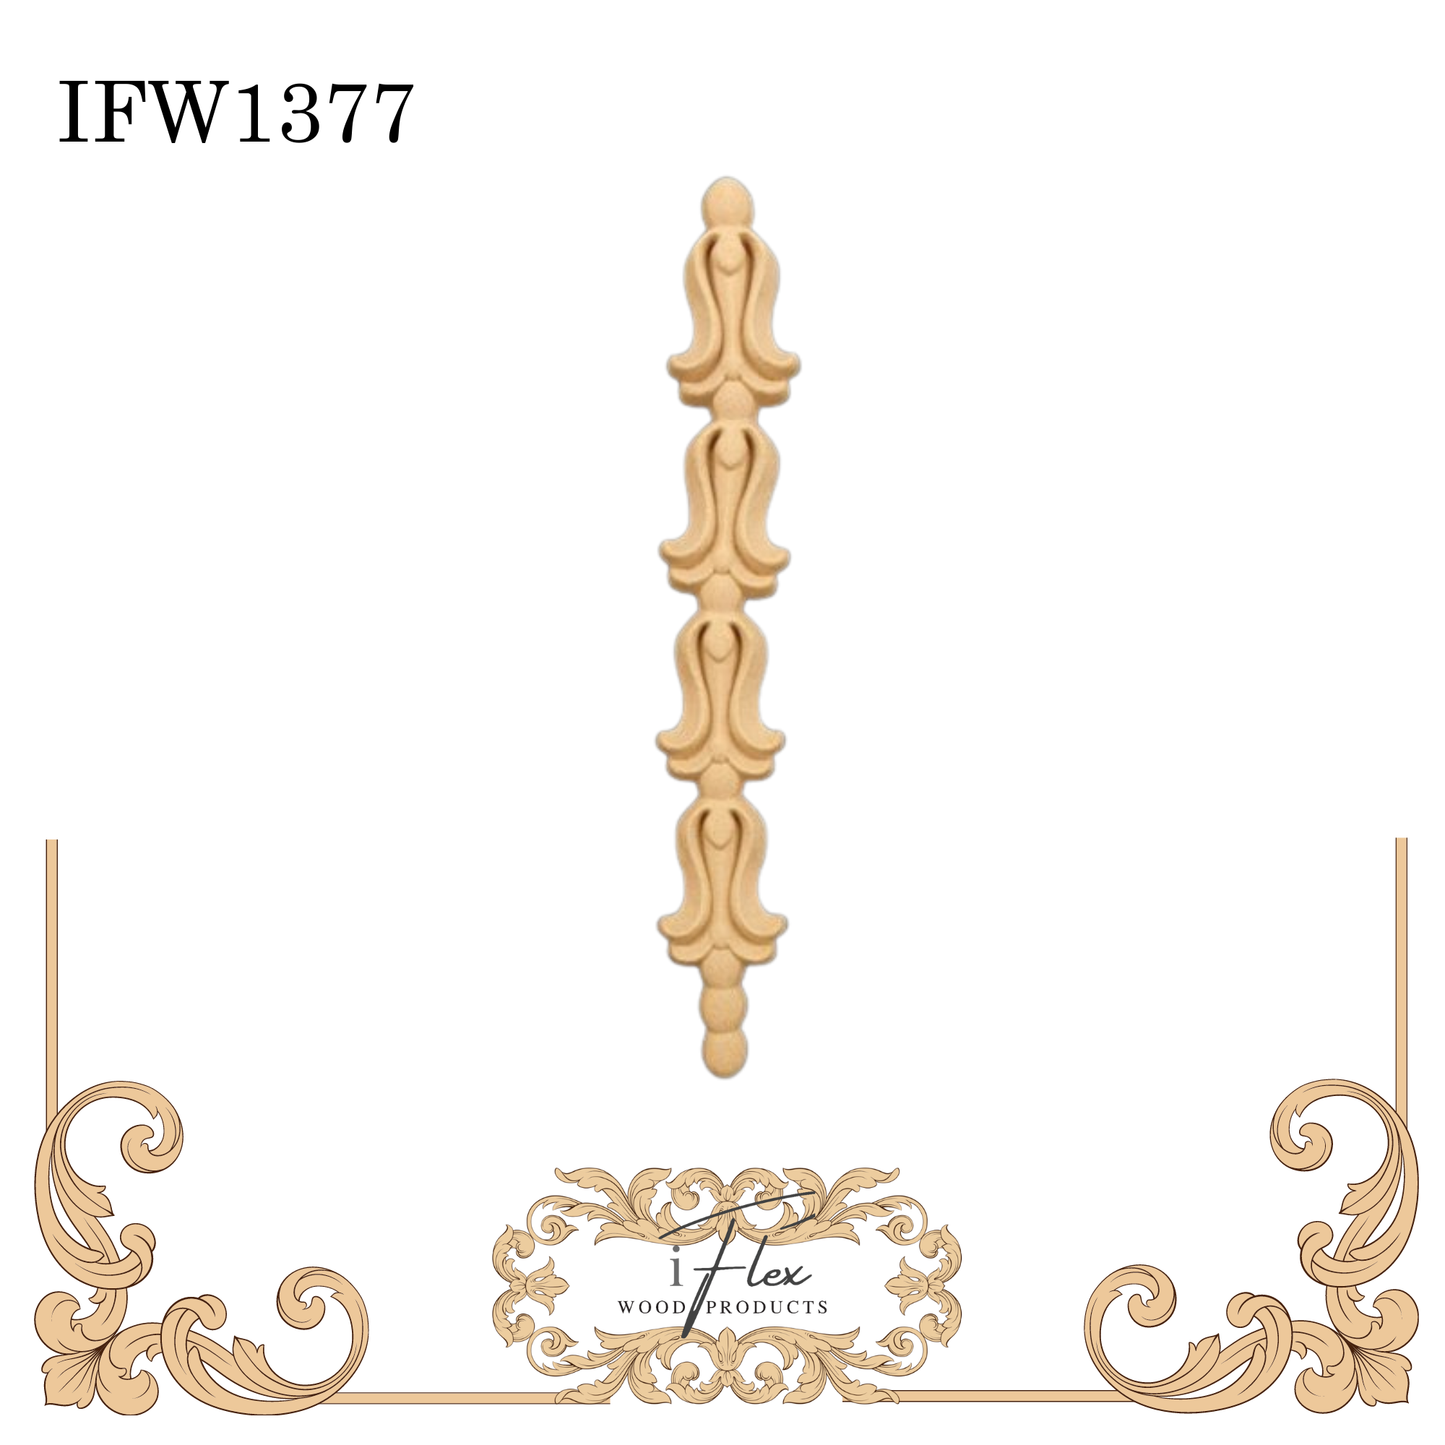 IFW 1377 iFlex Wood Products, bendable mouldings, flexible, wooden appliques, drop